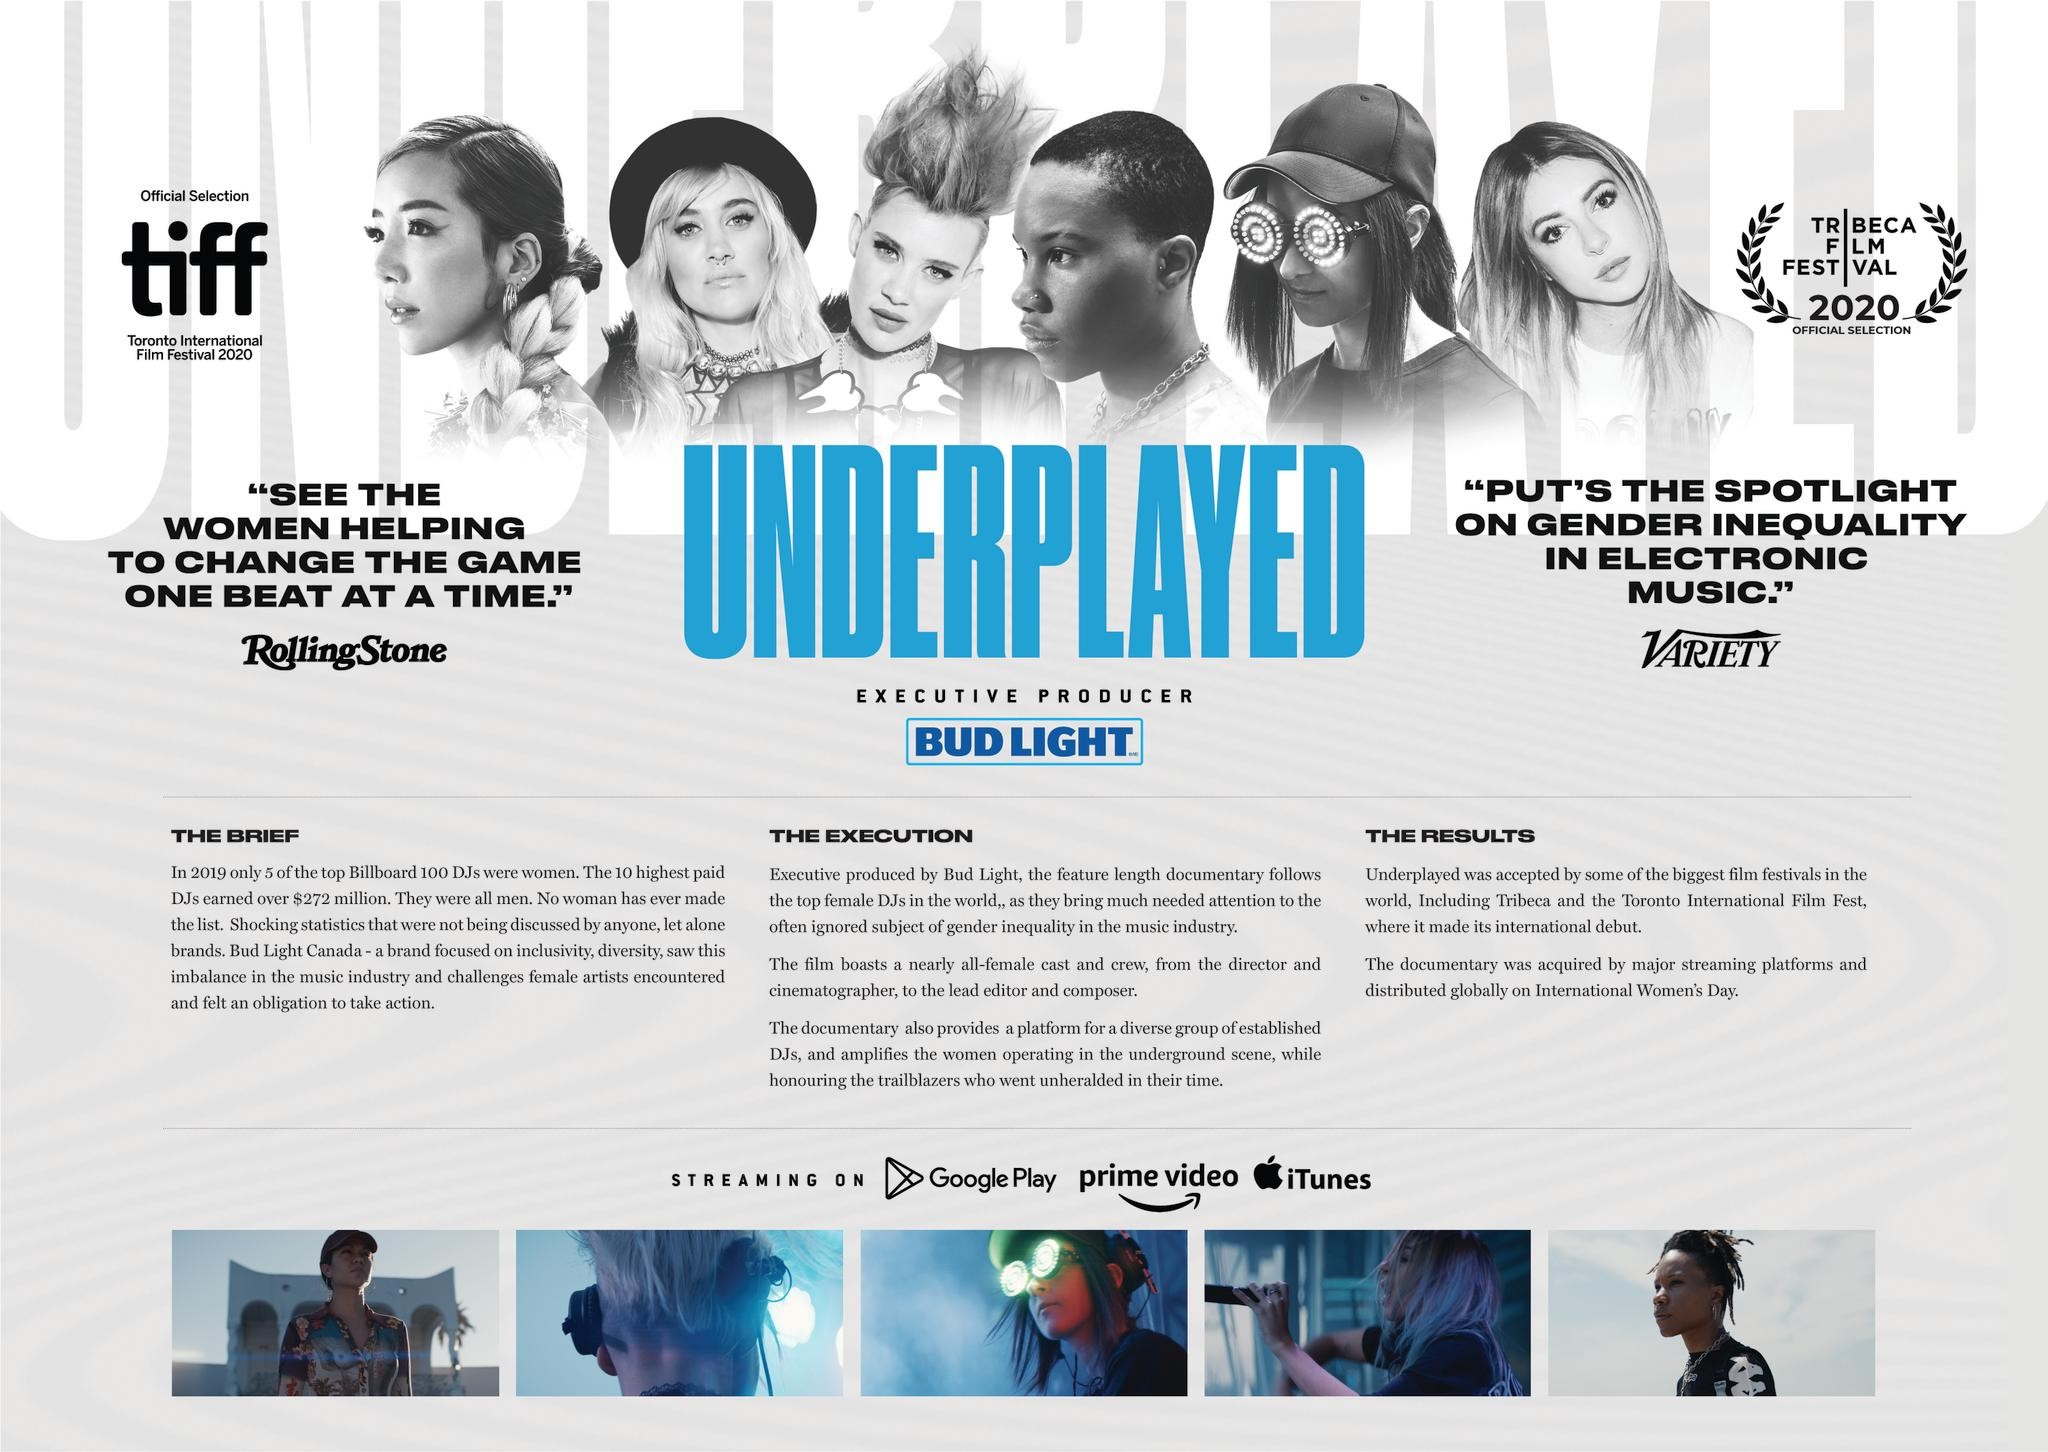 “UNDERPLAYED” FEATURE LENGTH DOCUMENTARY